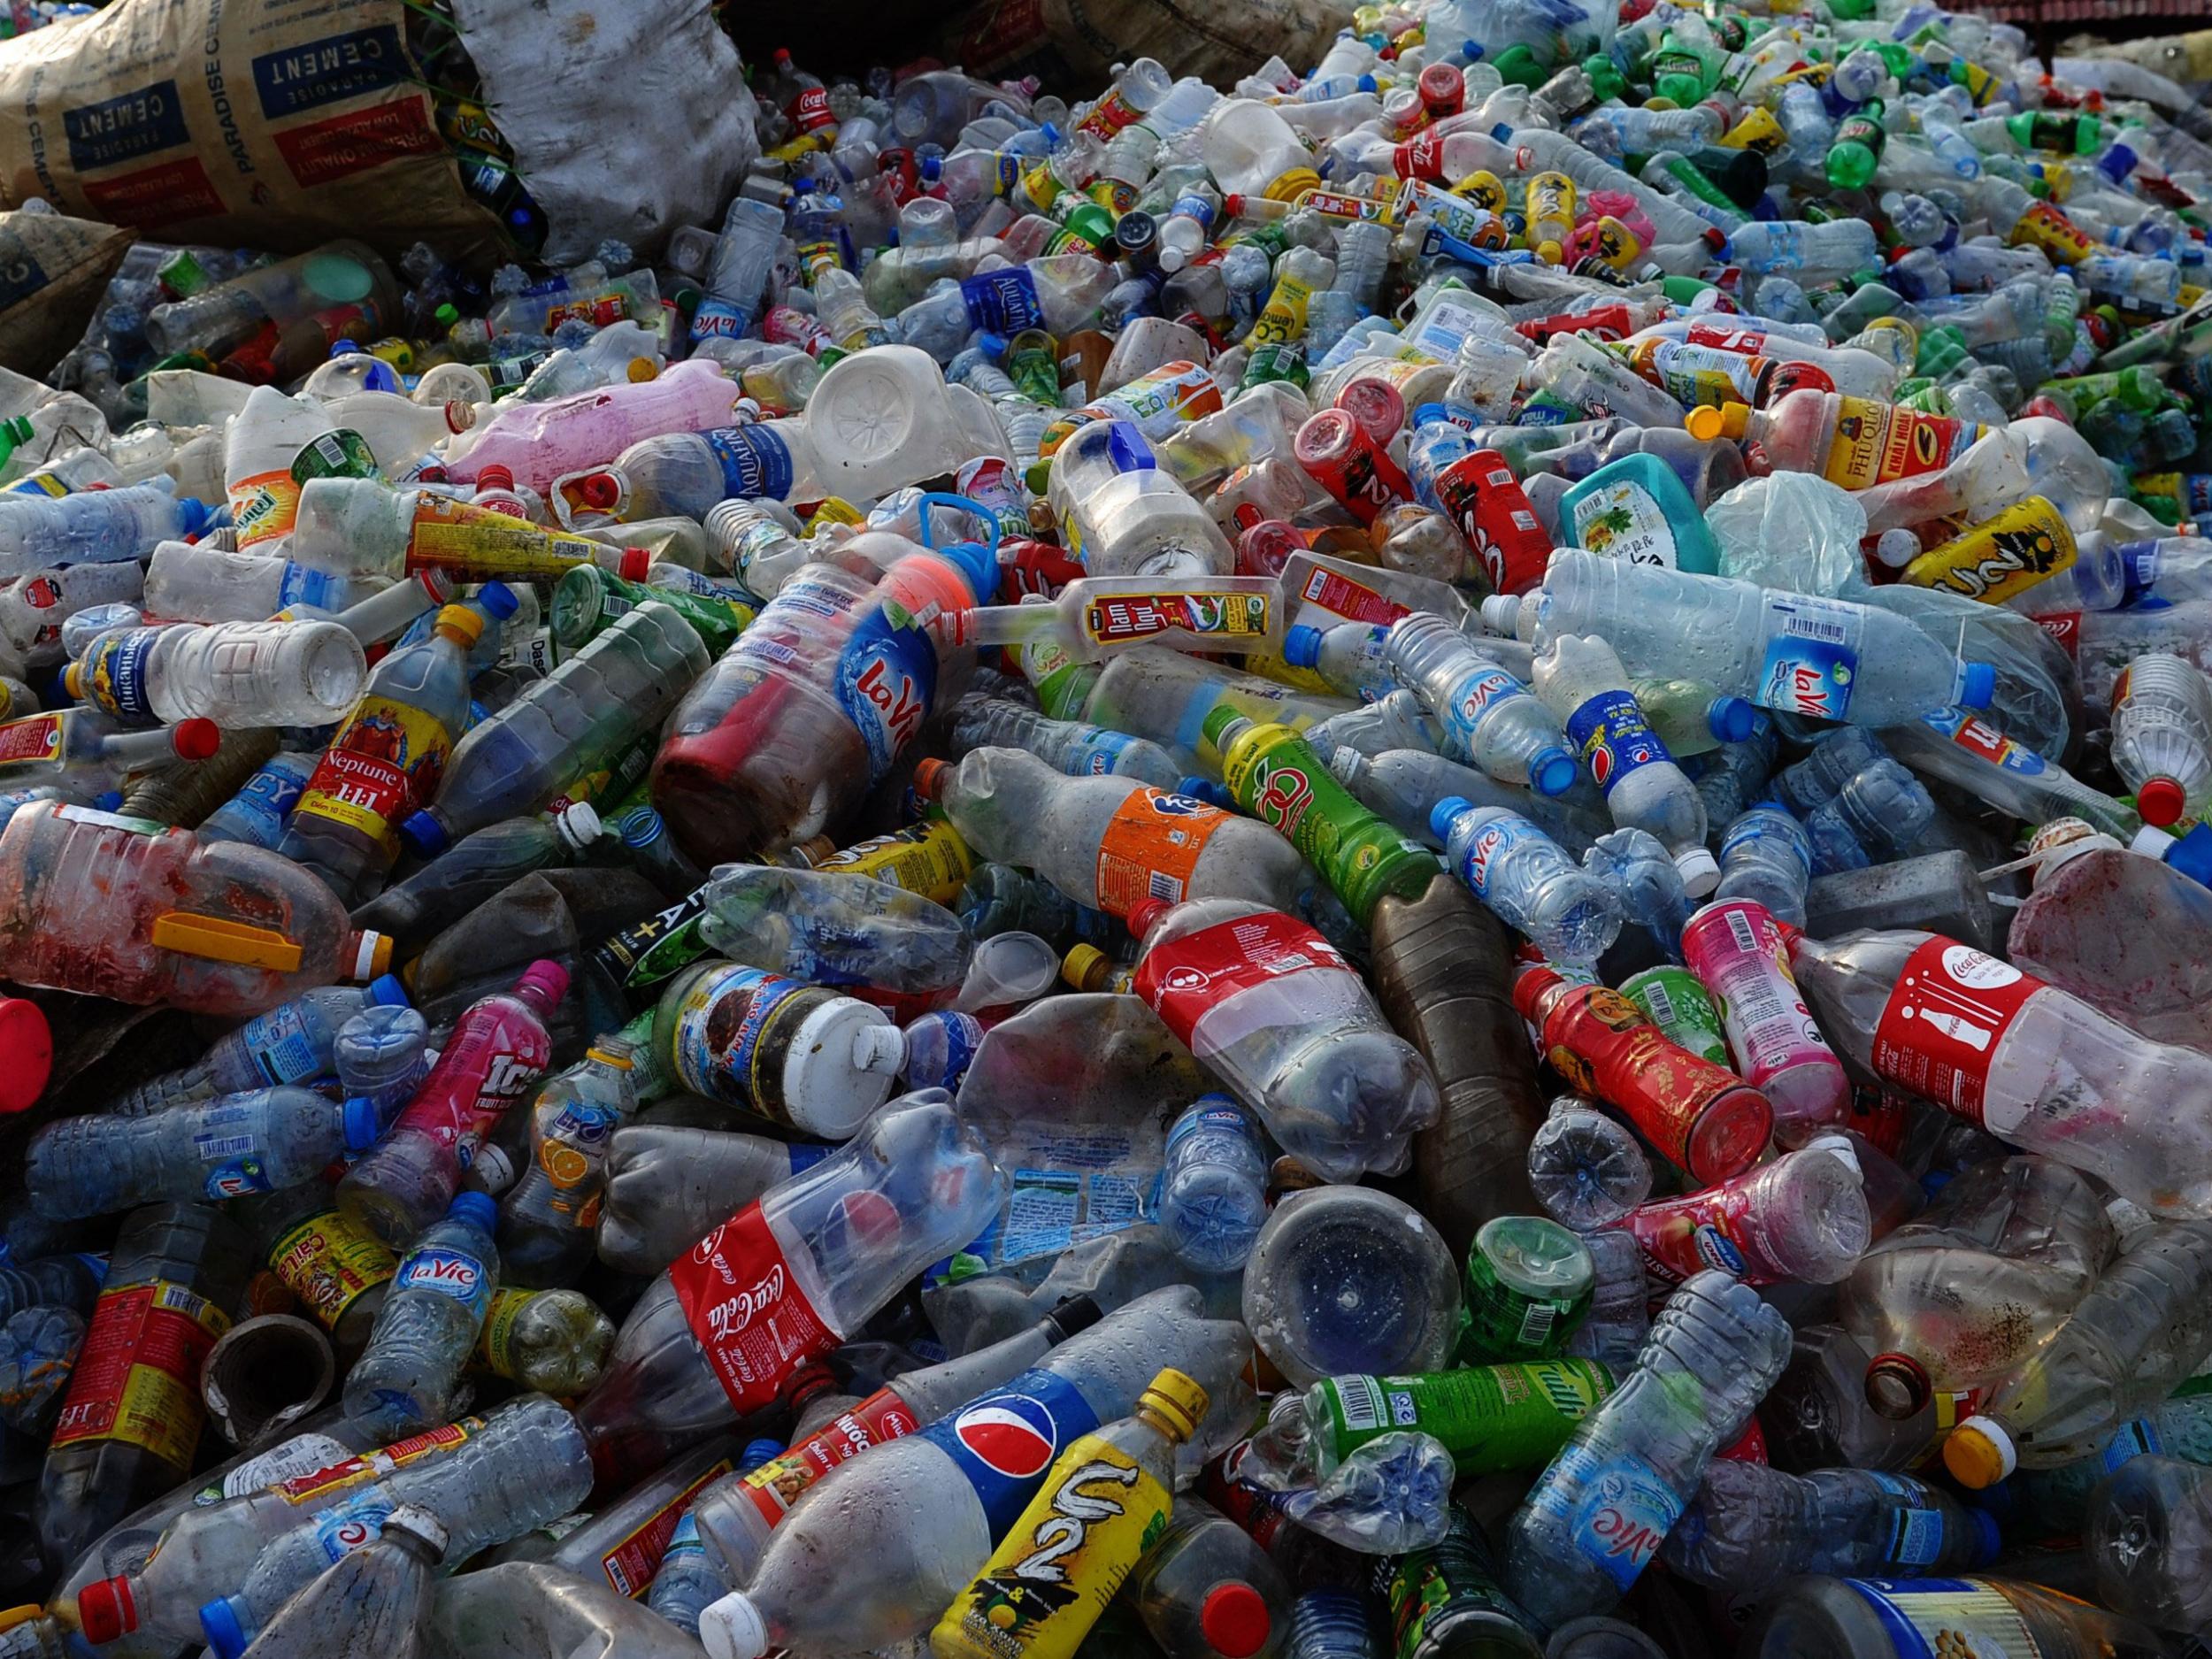 By 2050, there will be as much plastic as fish in our oceans